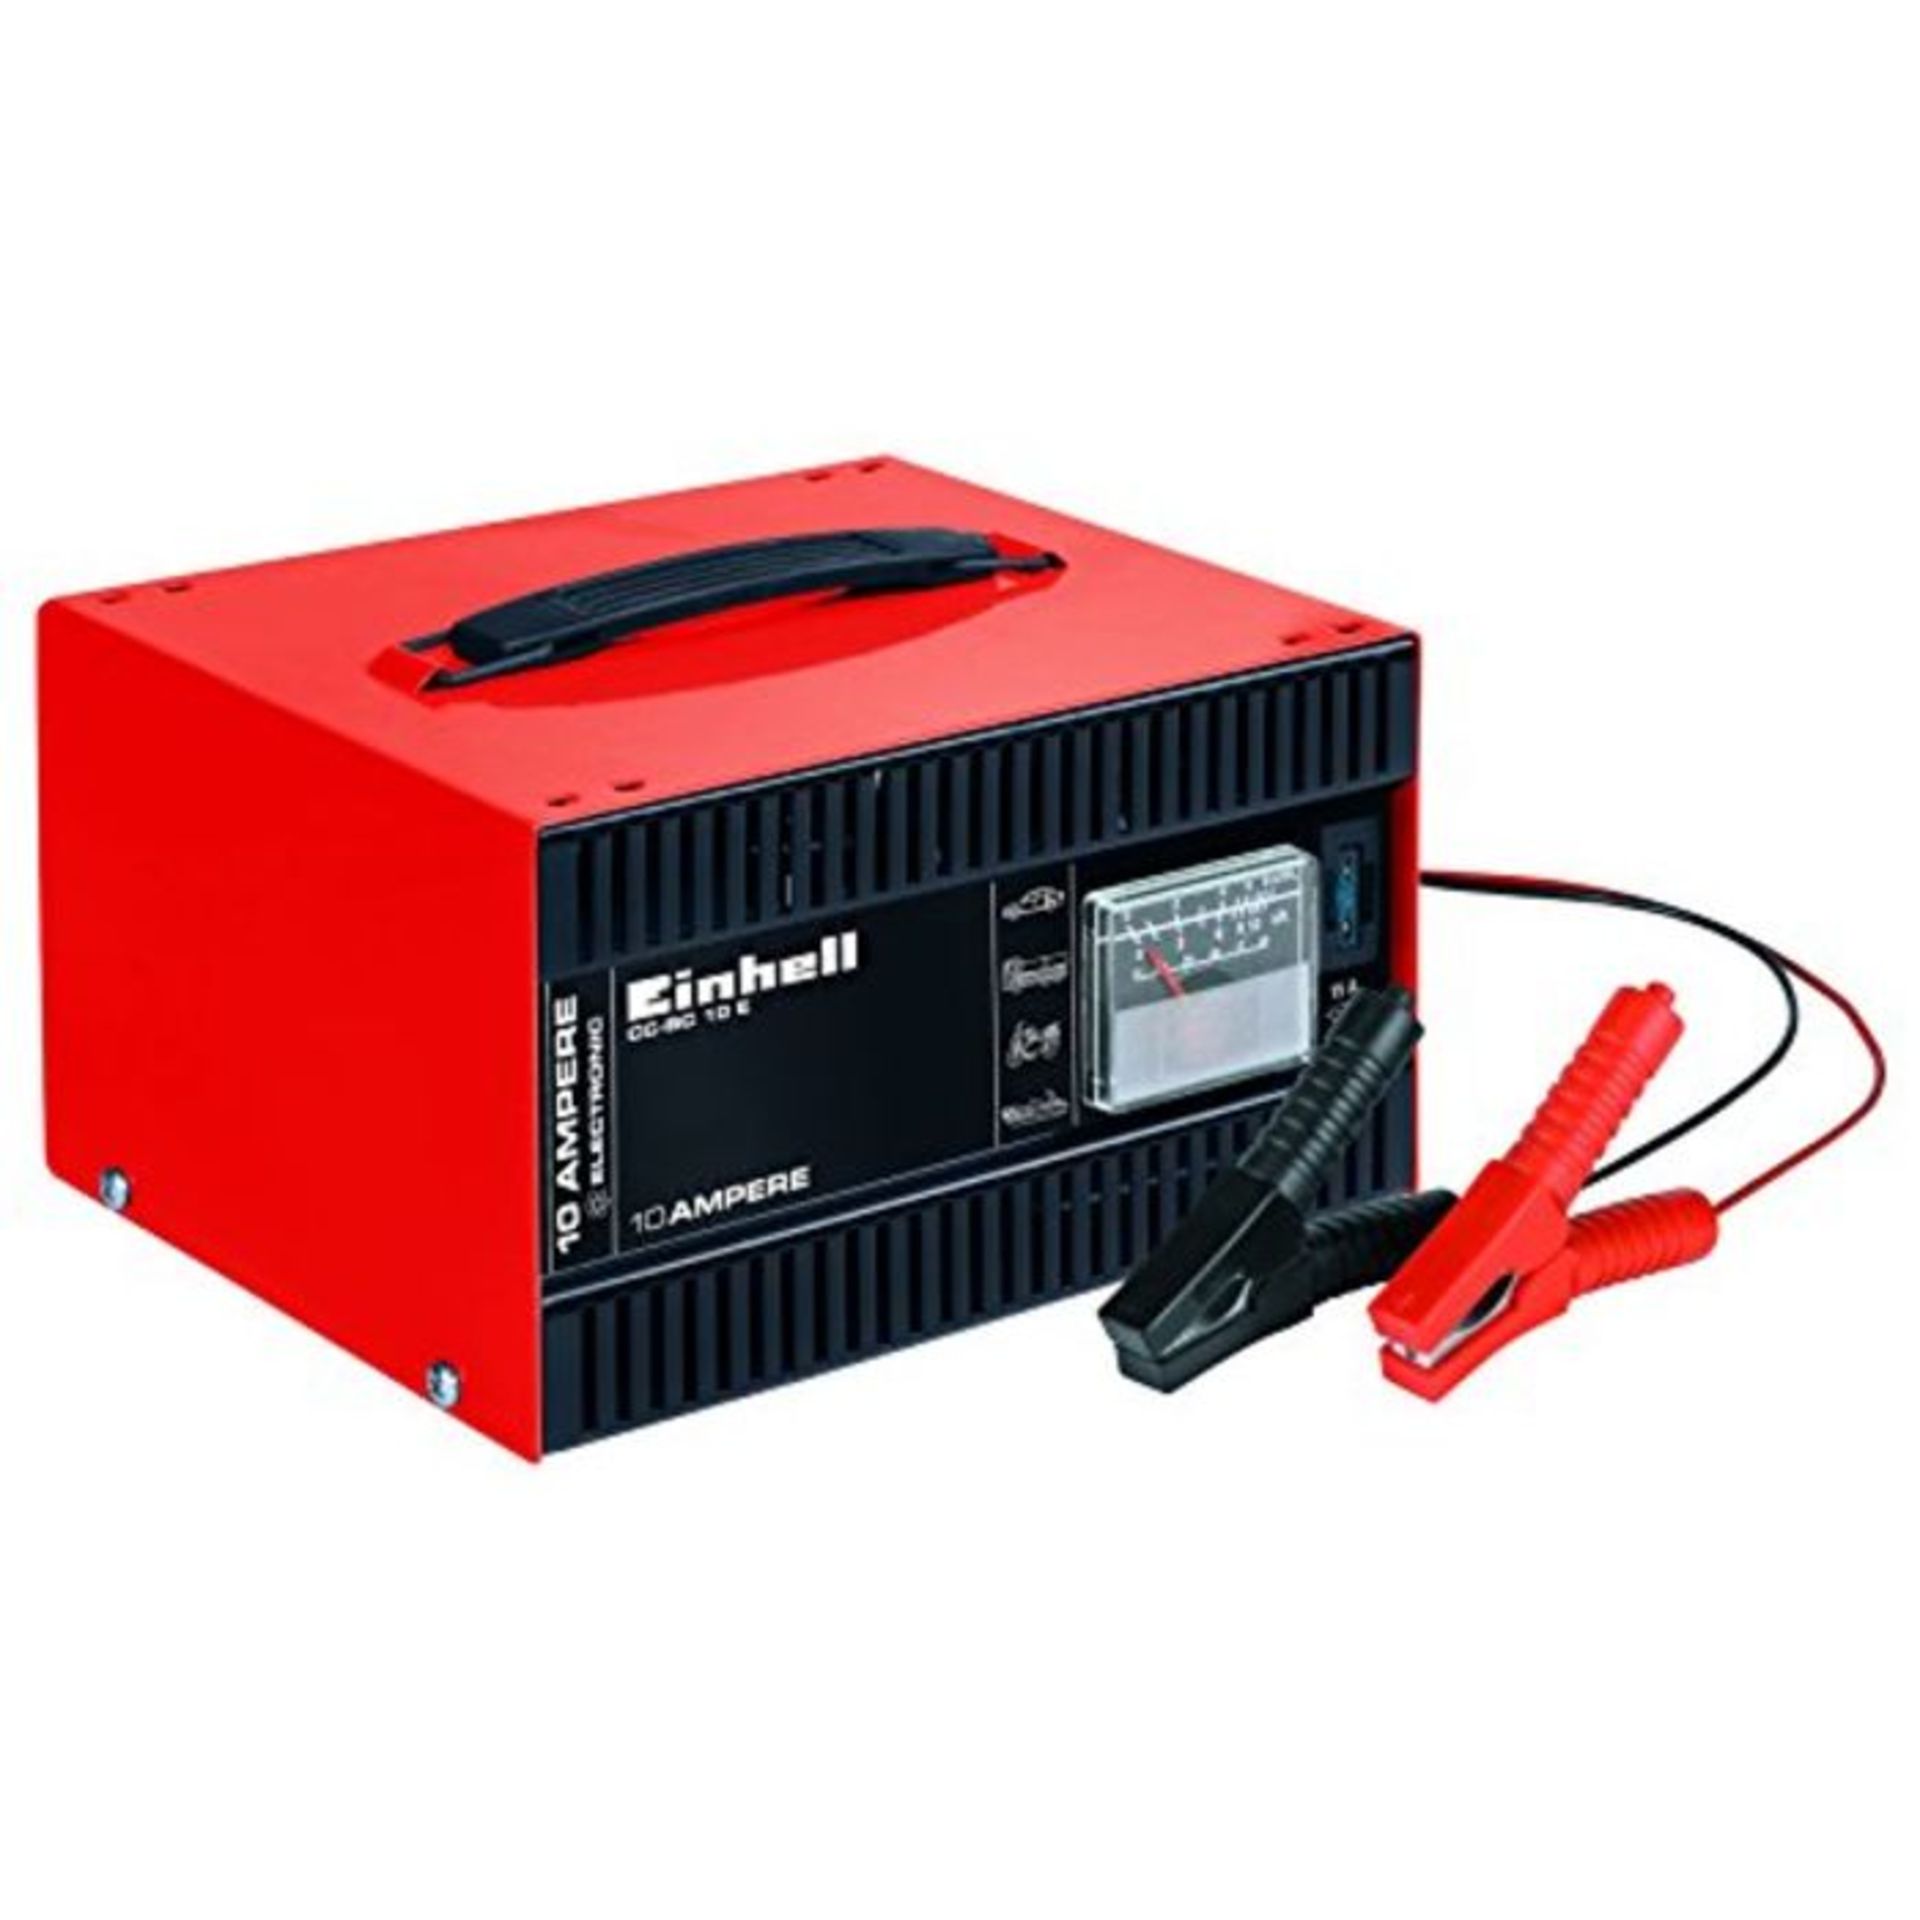 Einhell Battery Charger CC-BC 10 E (for Batteries from 5 to 200 Ah, 12 V Charging V